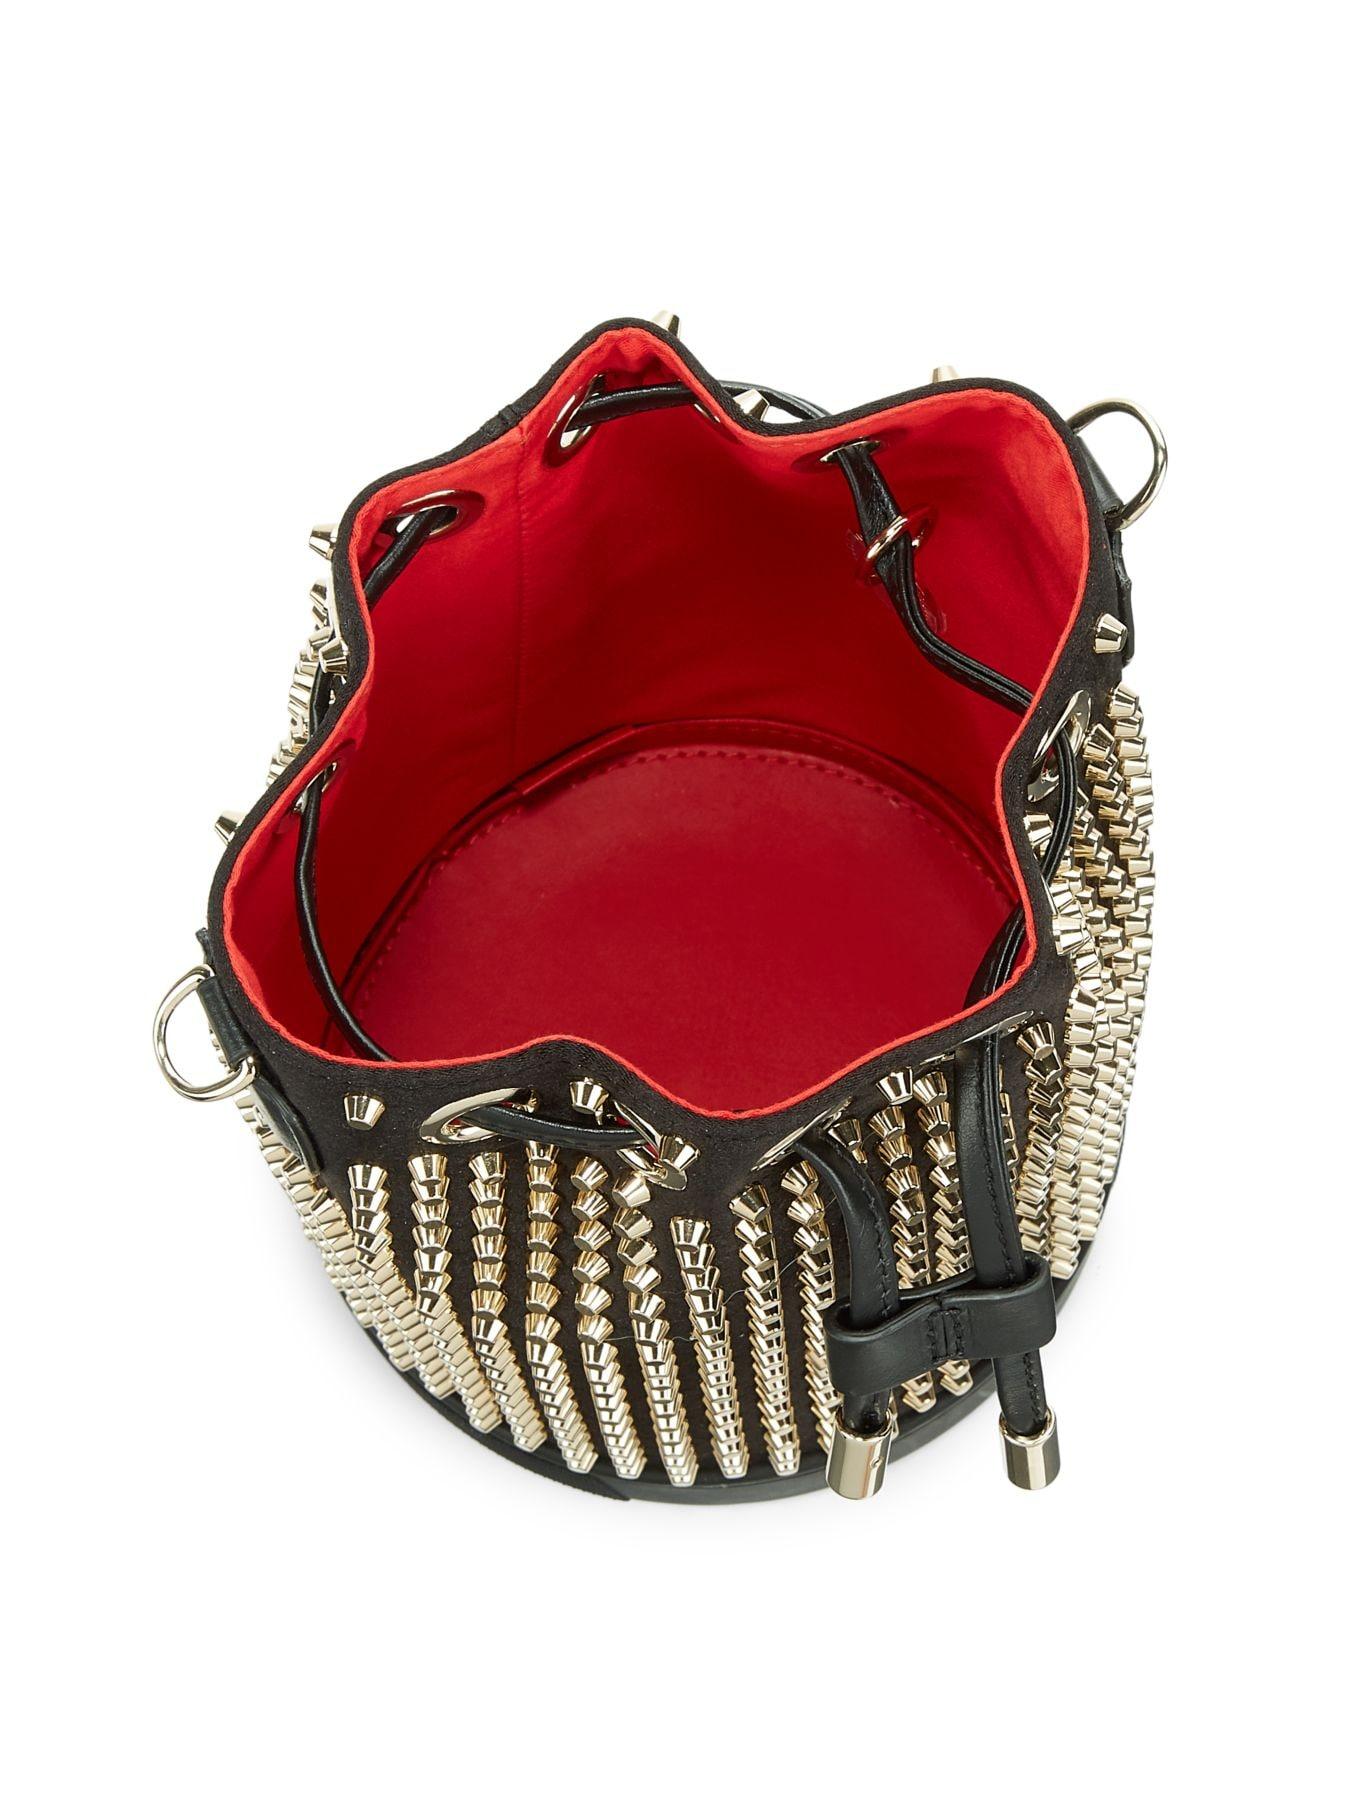 Christian Louboutin Marie Jane Studded Leather Bucket Bag in Black 